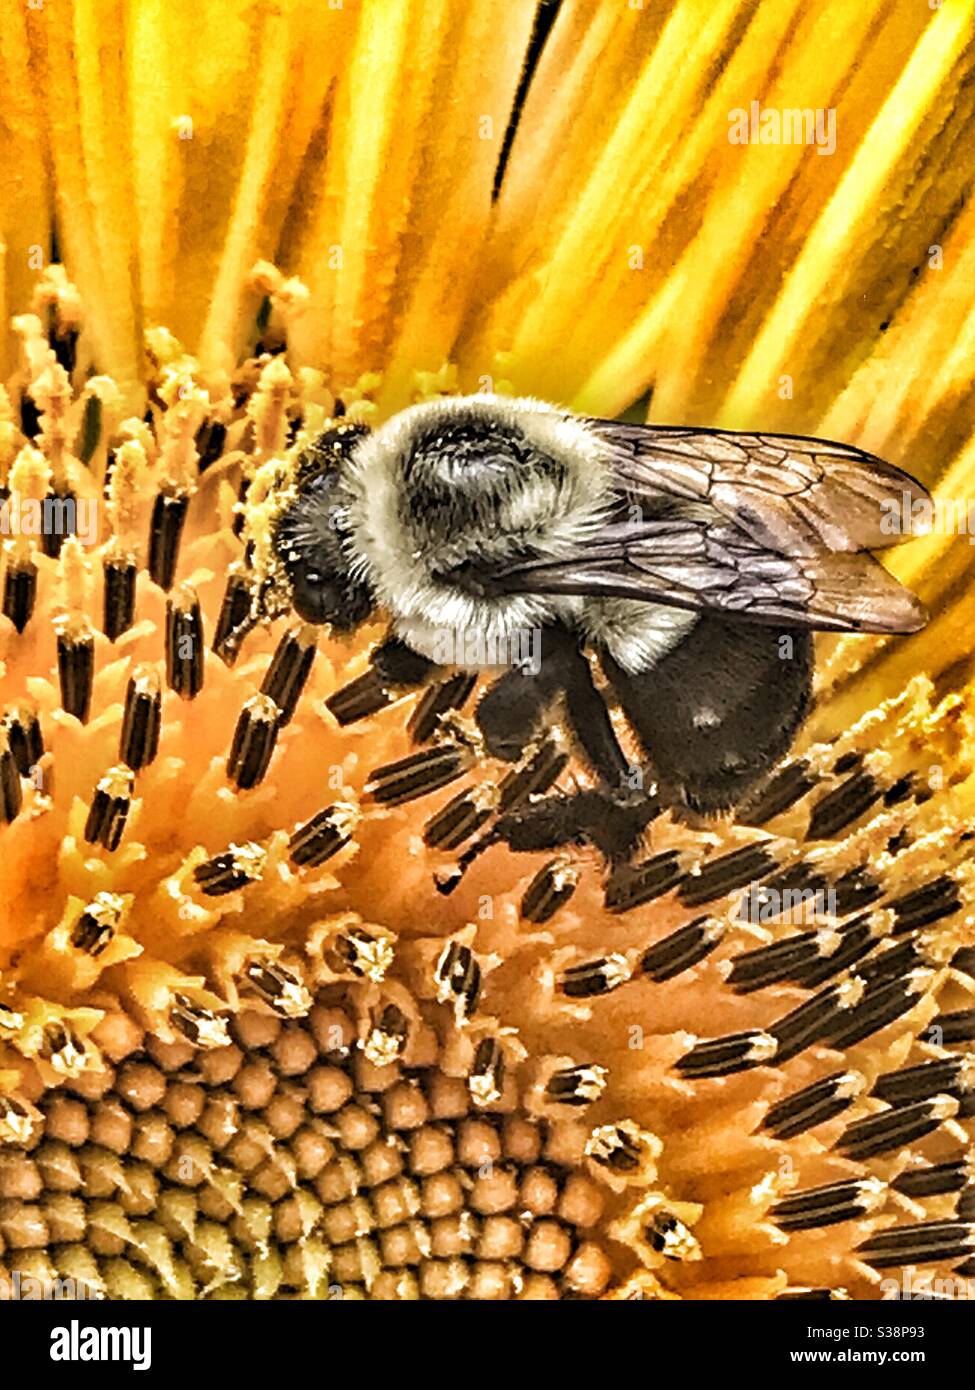 Bumblebee collecting pollen from a sunflower Stock Photo